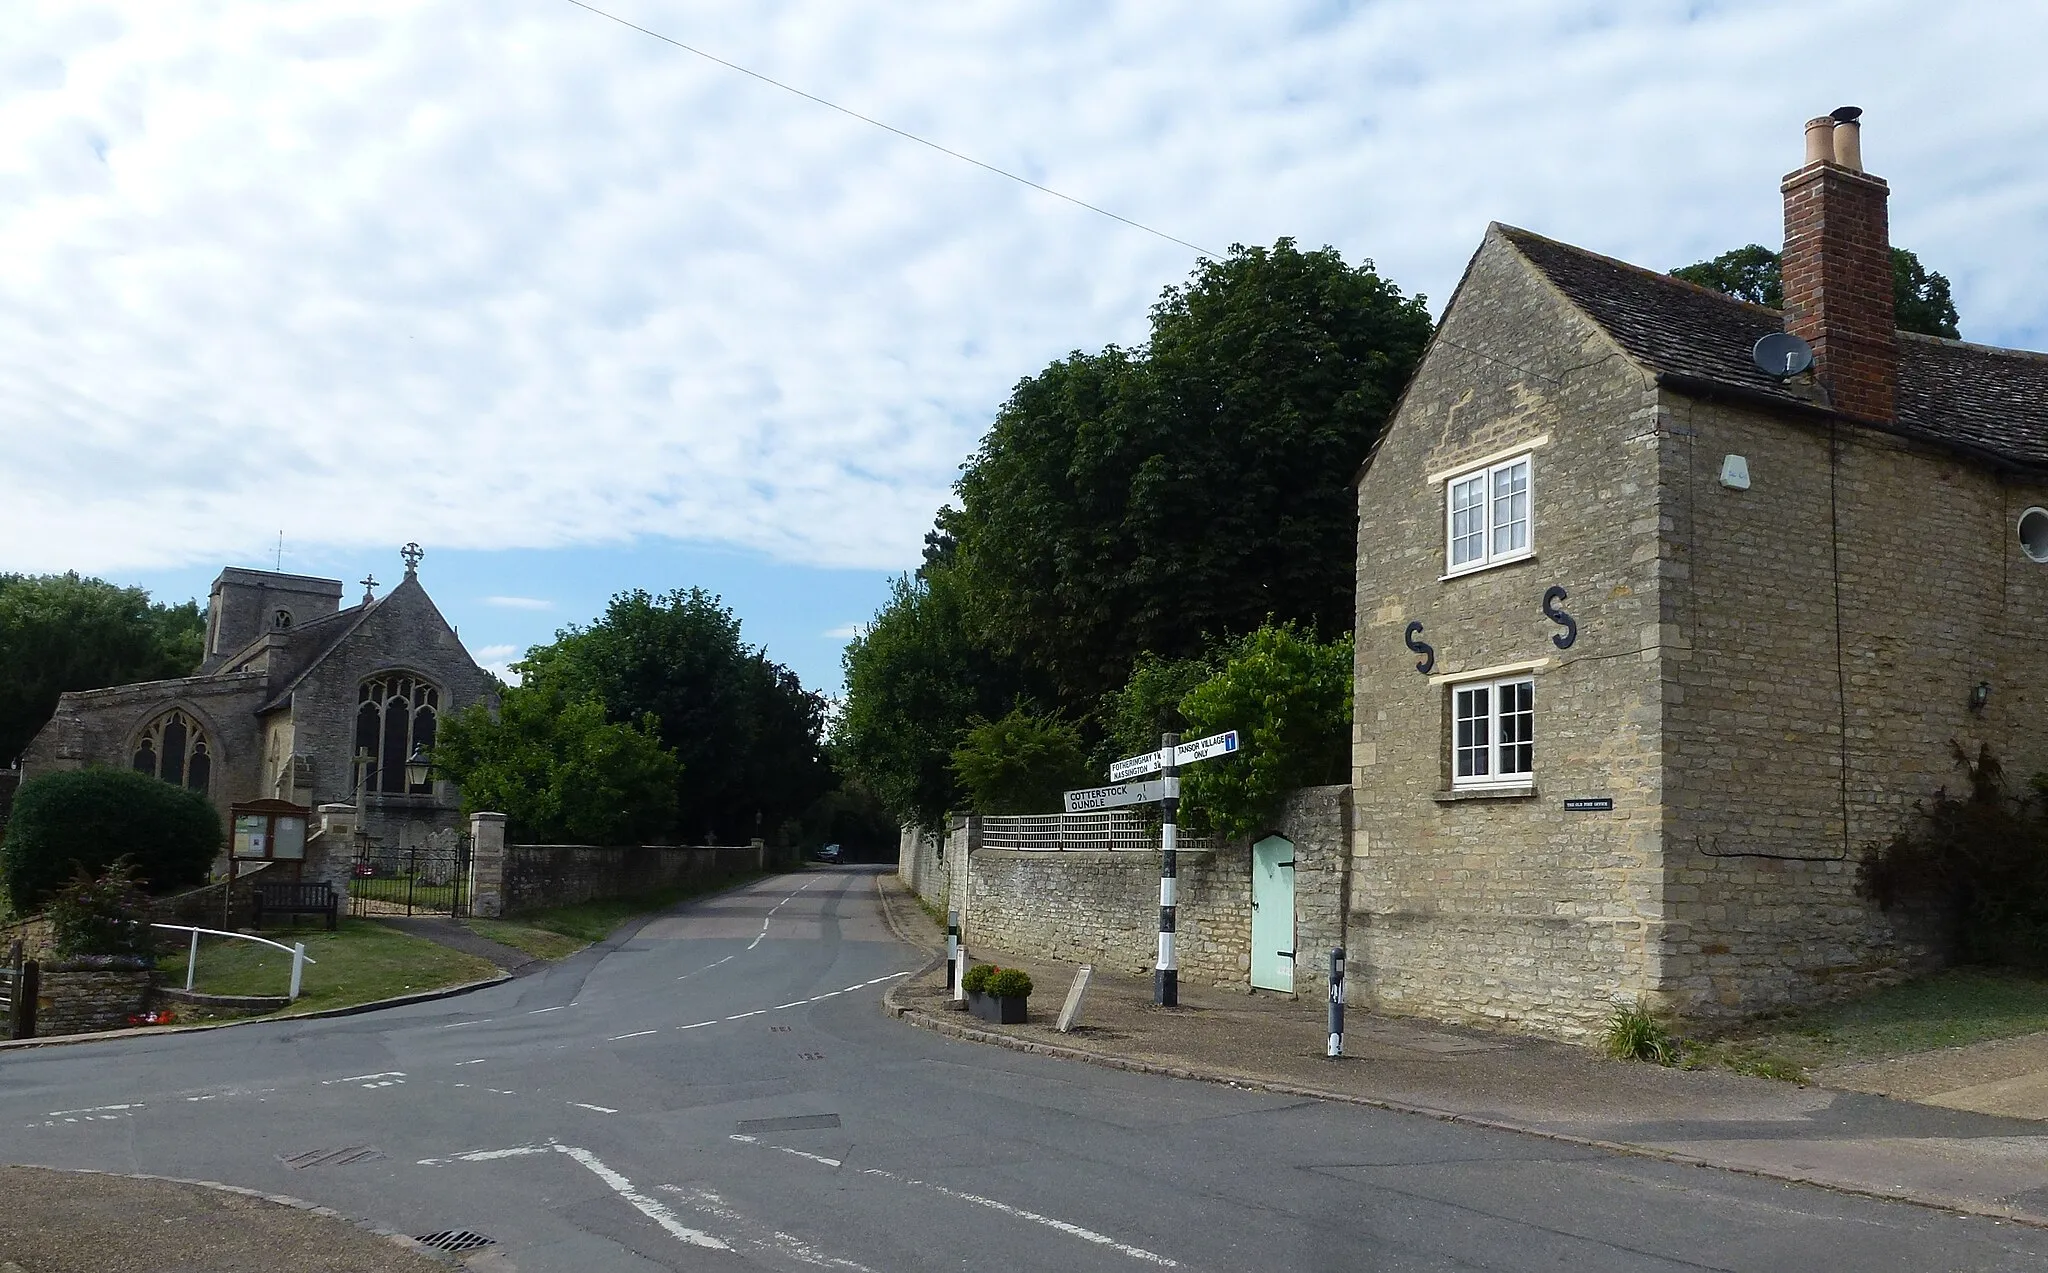 Photo showing: The Old Post Office in Tansor, Northamptonshire